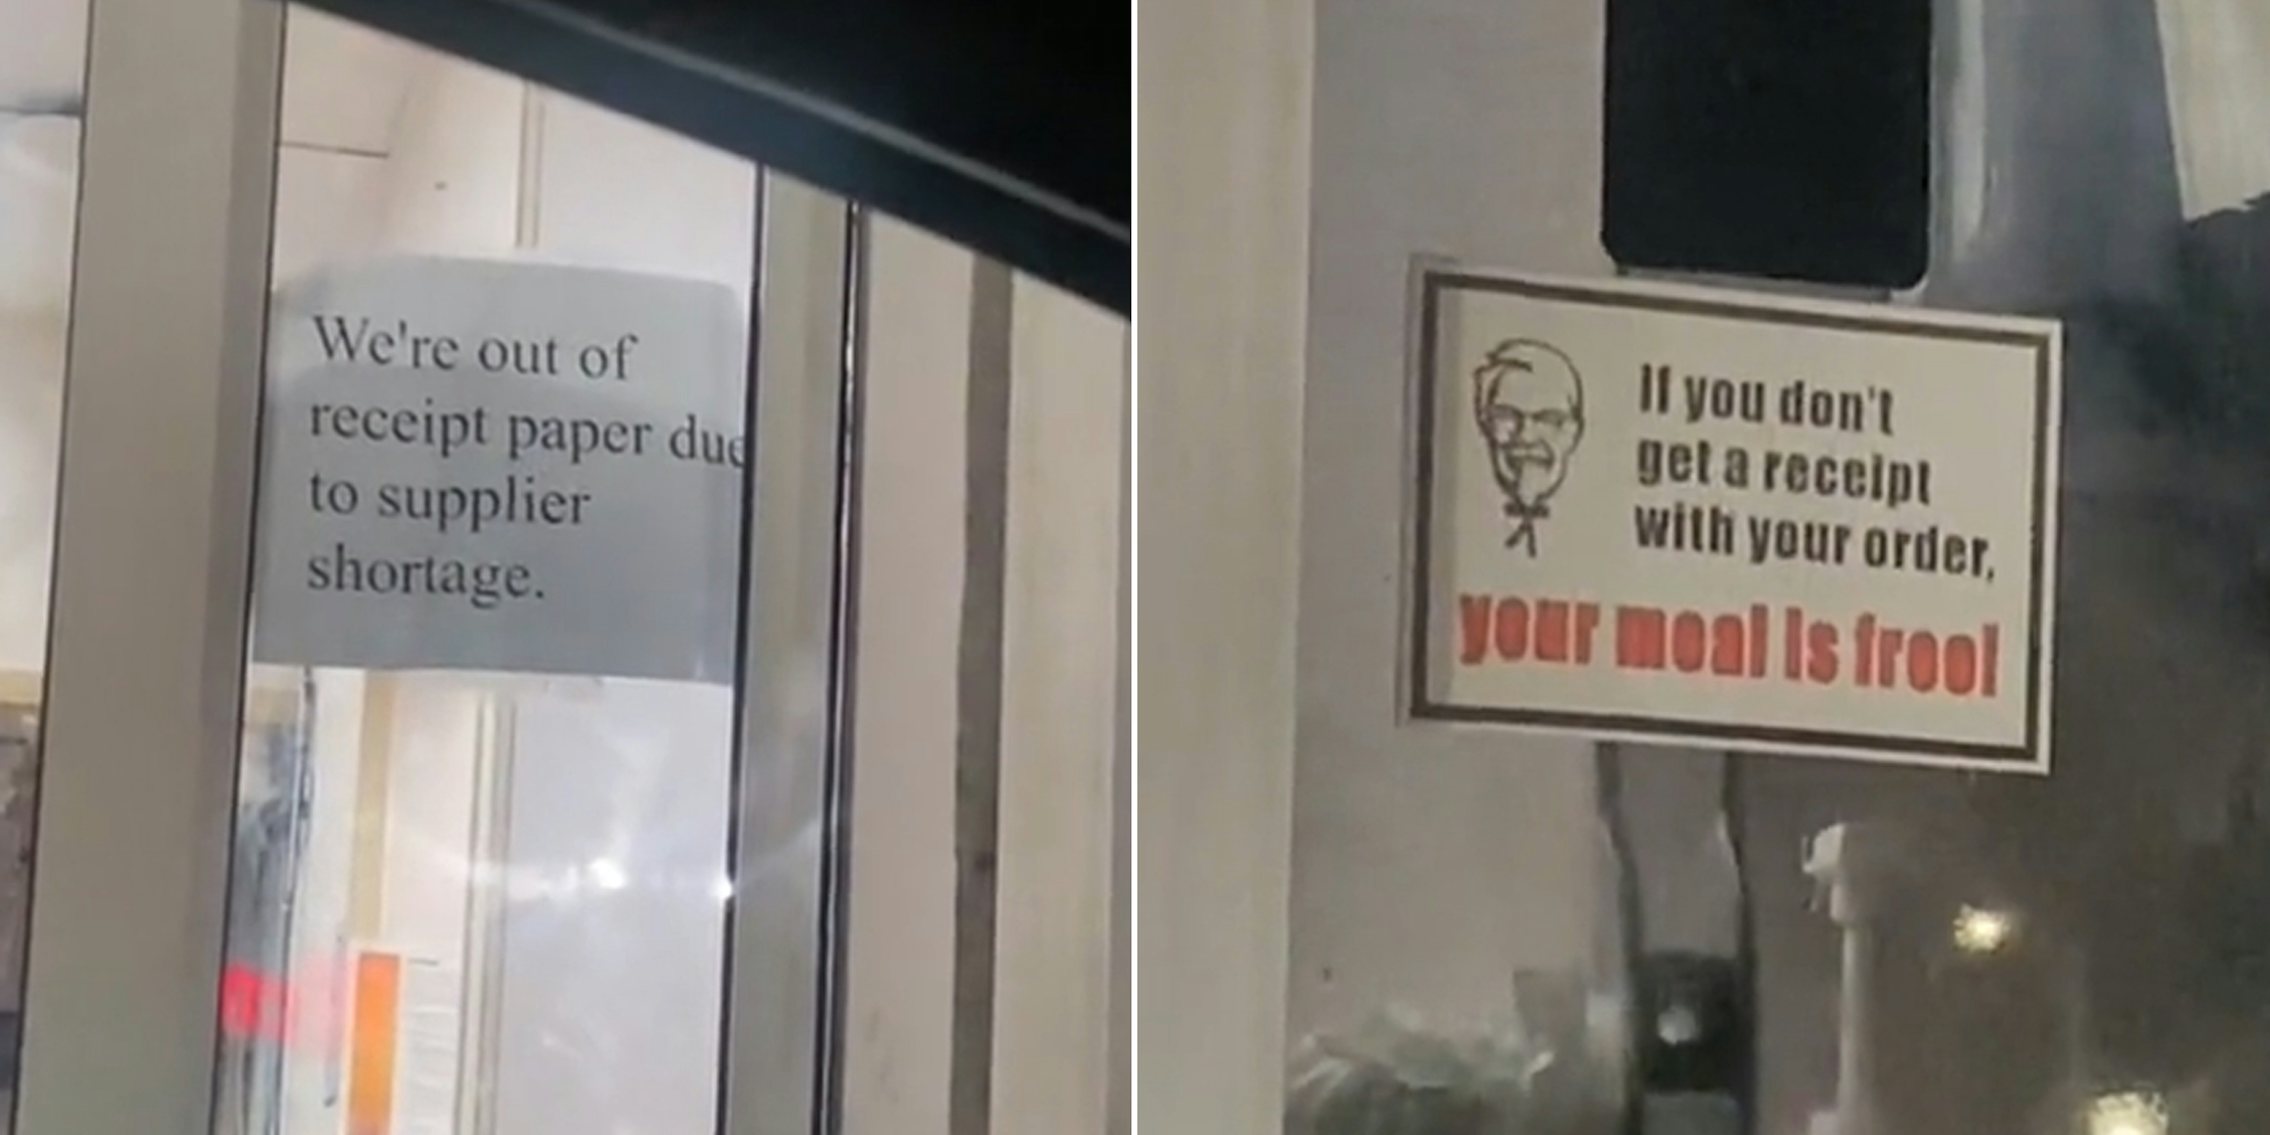 piece of paper in drive-thru window that reads 'We're out of receipt paper due to supplier shortage.' (l) KFC sign that reads 'If you don't get a receipt with your order, your meal is free!'